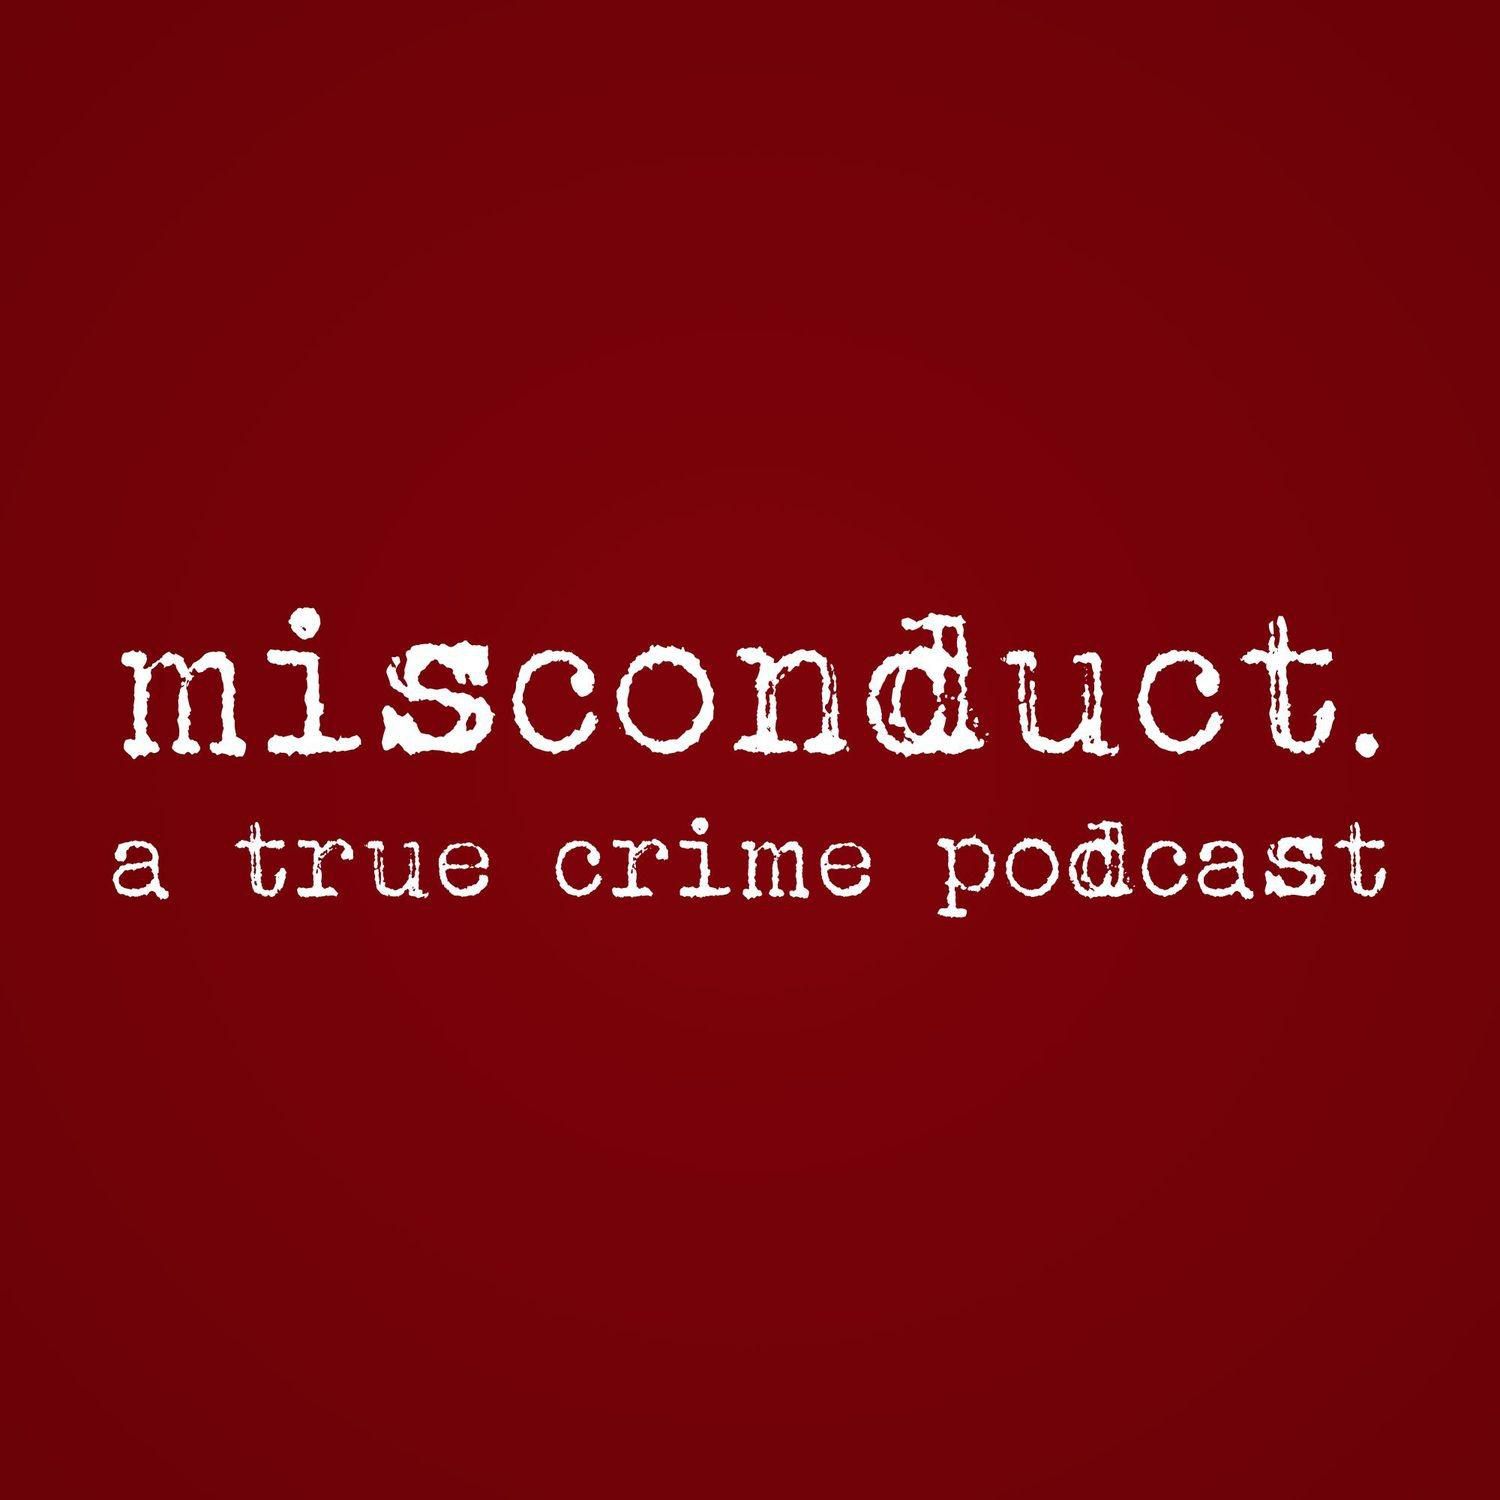 misconduct. a true crime podcast:misconduct. a true crime podcast